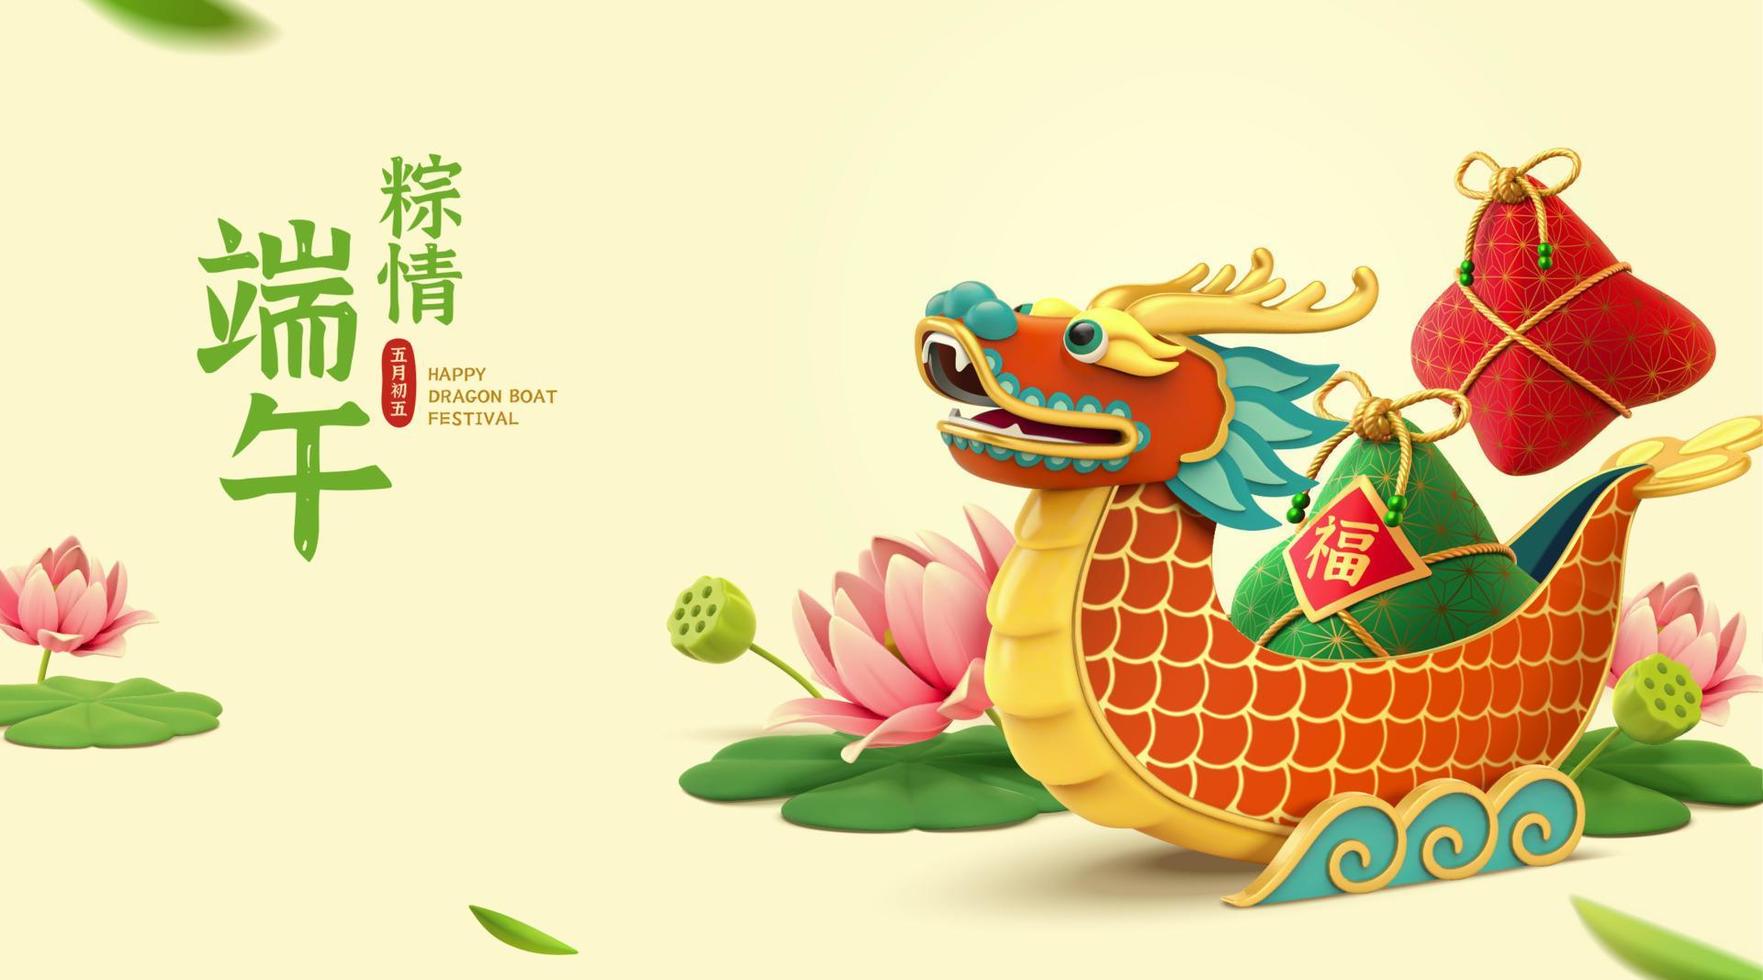 3d Dragon Boat Festival banner. Cute cartoon boat floats in the lotus river. Concept of iconic traditional water sport activity. Translation, Happy Duanwu Holiday. vector